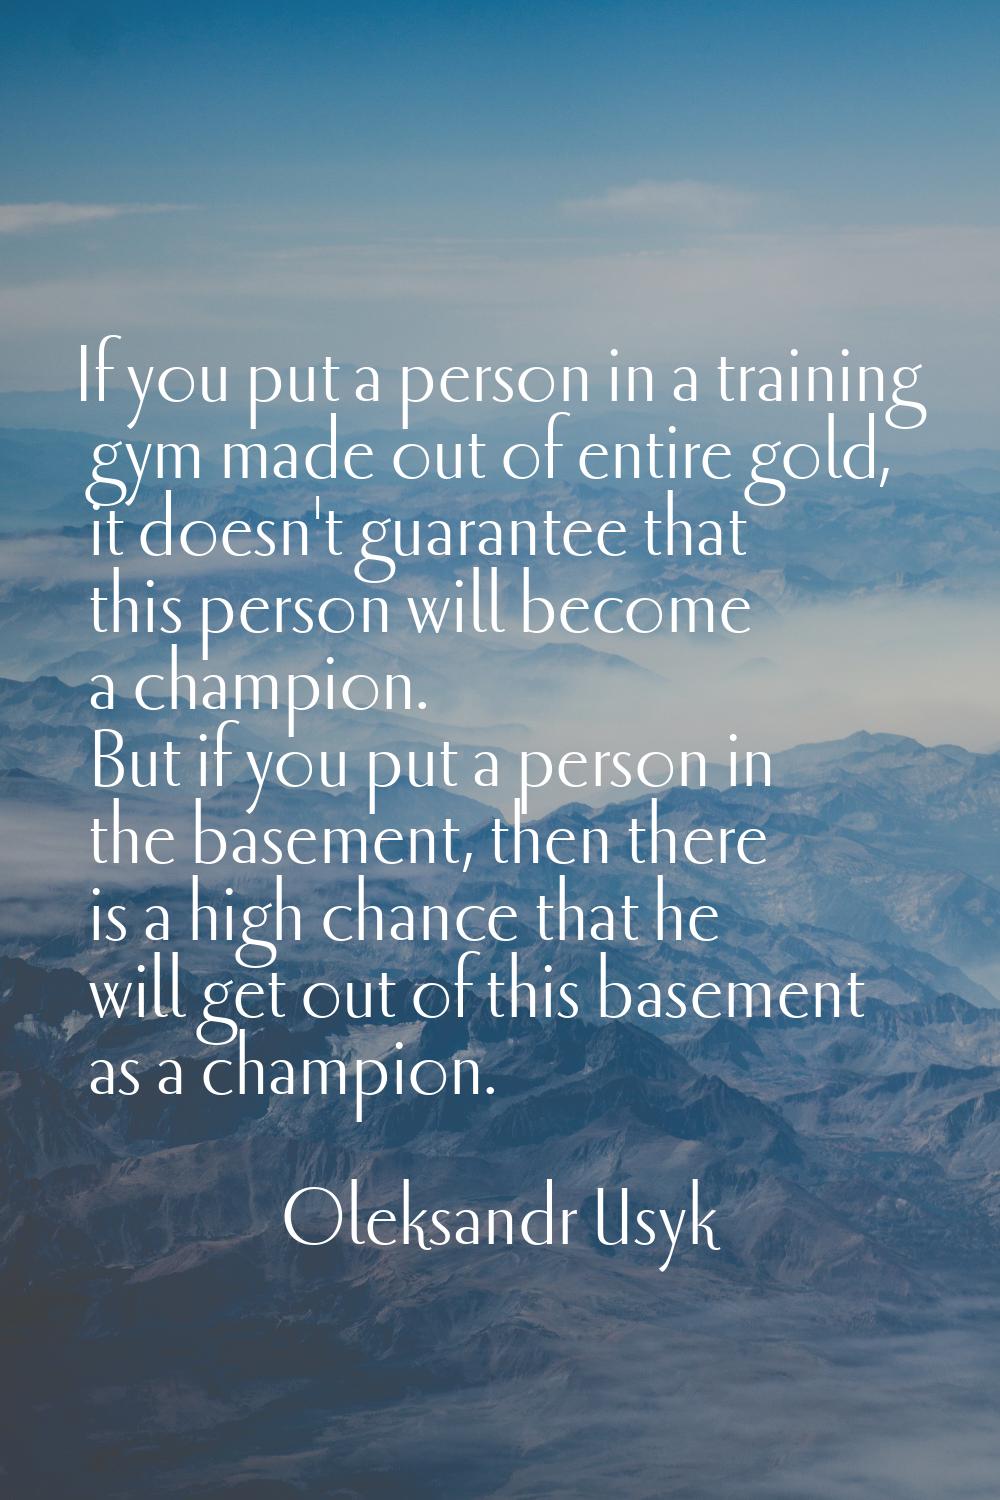 If you put a person in a training gym made out of entire gold, it doesn't guarantee that this perso